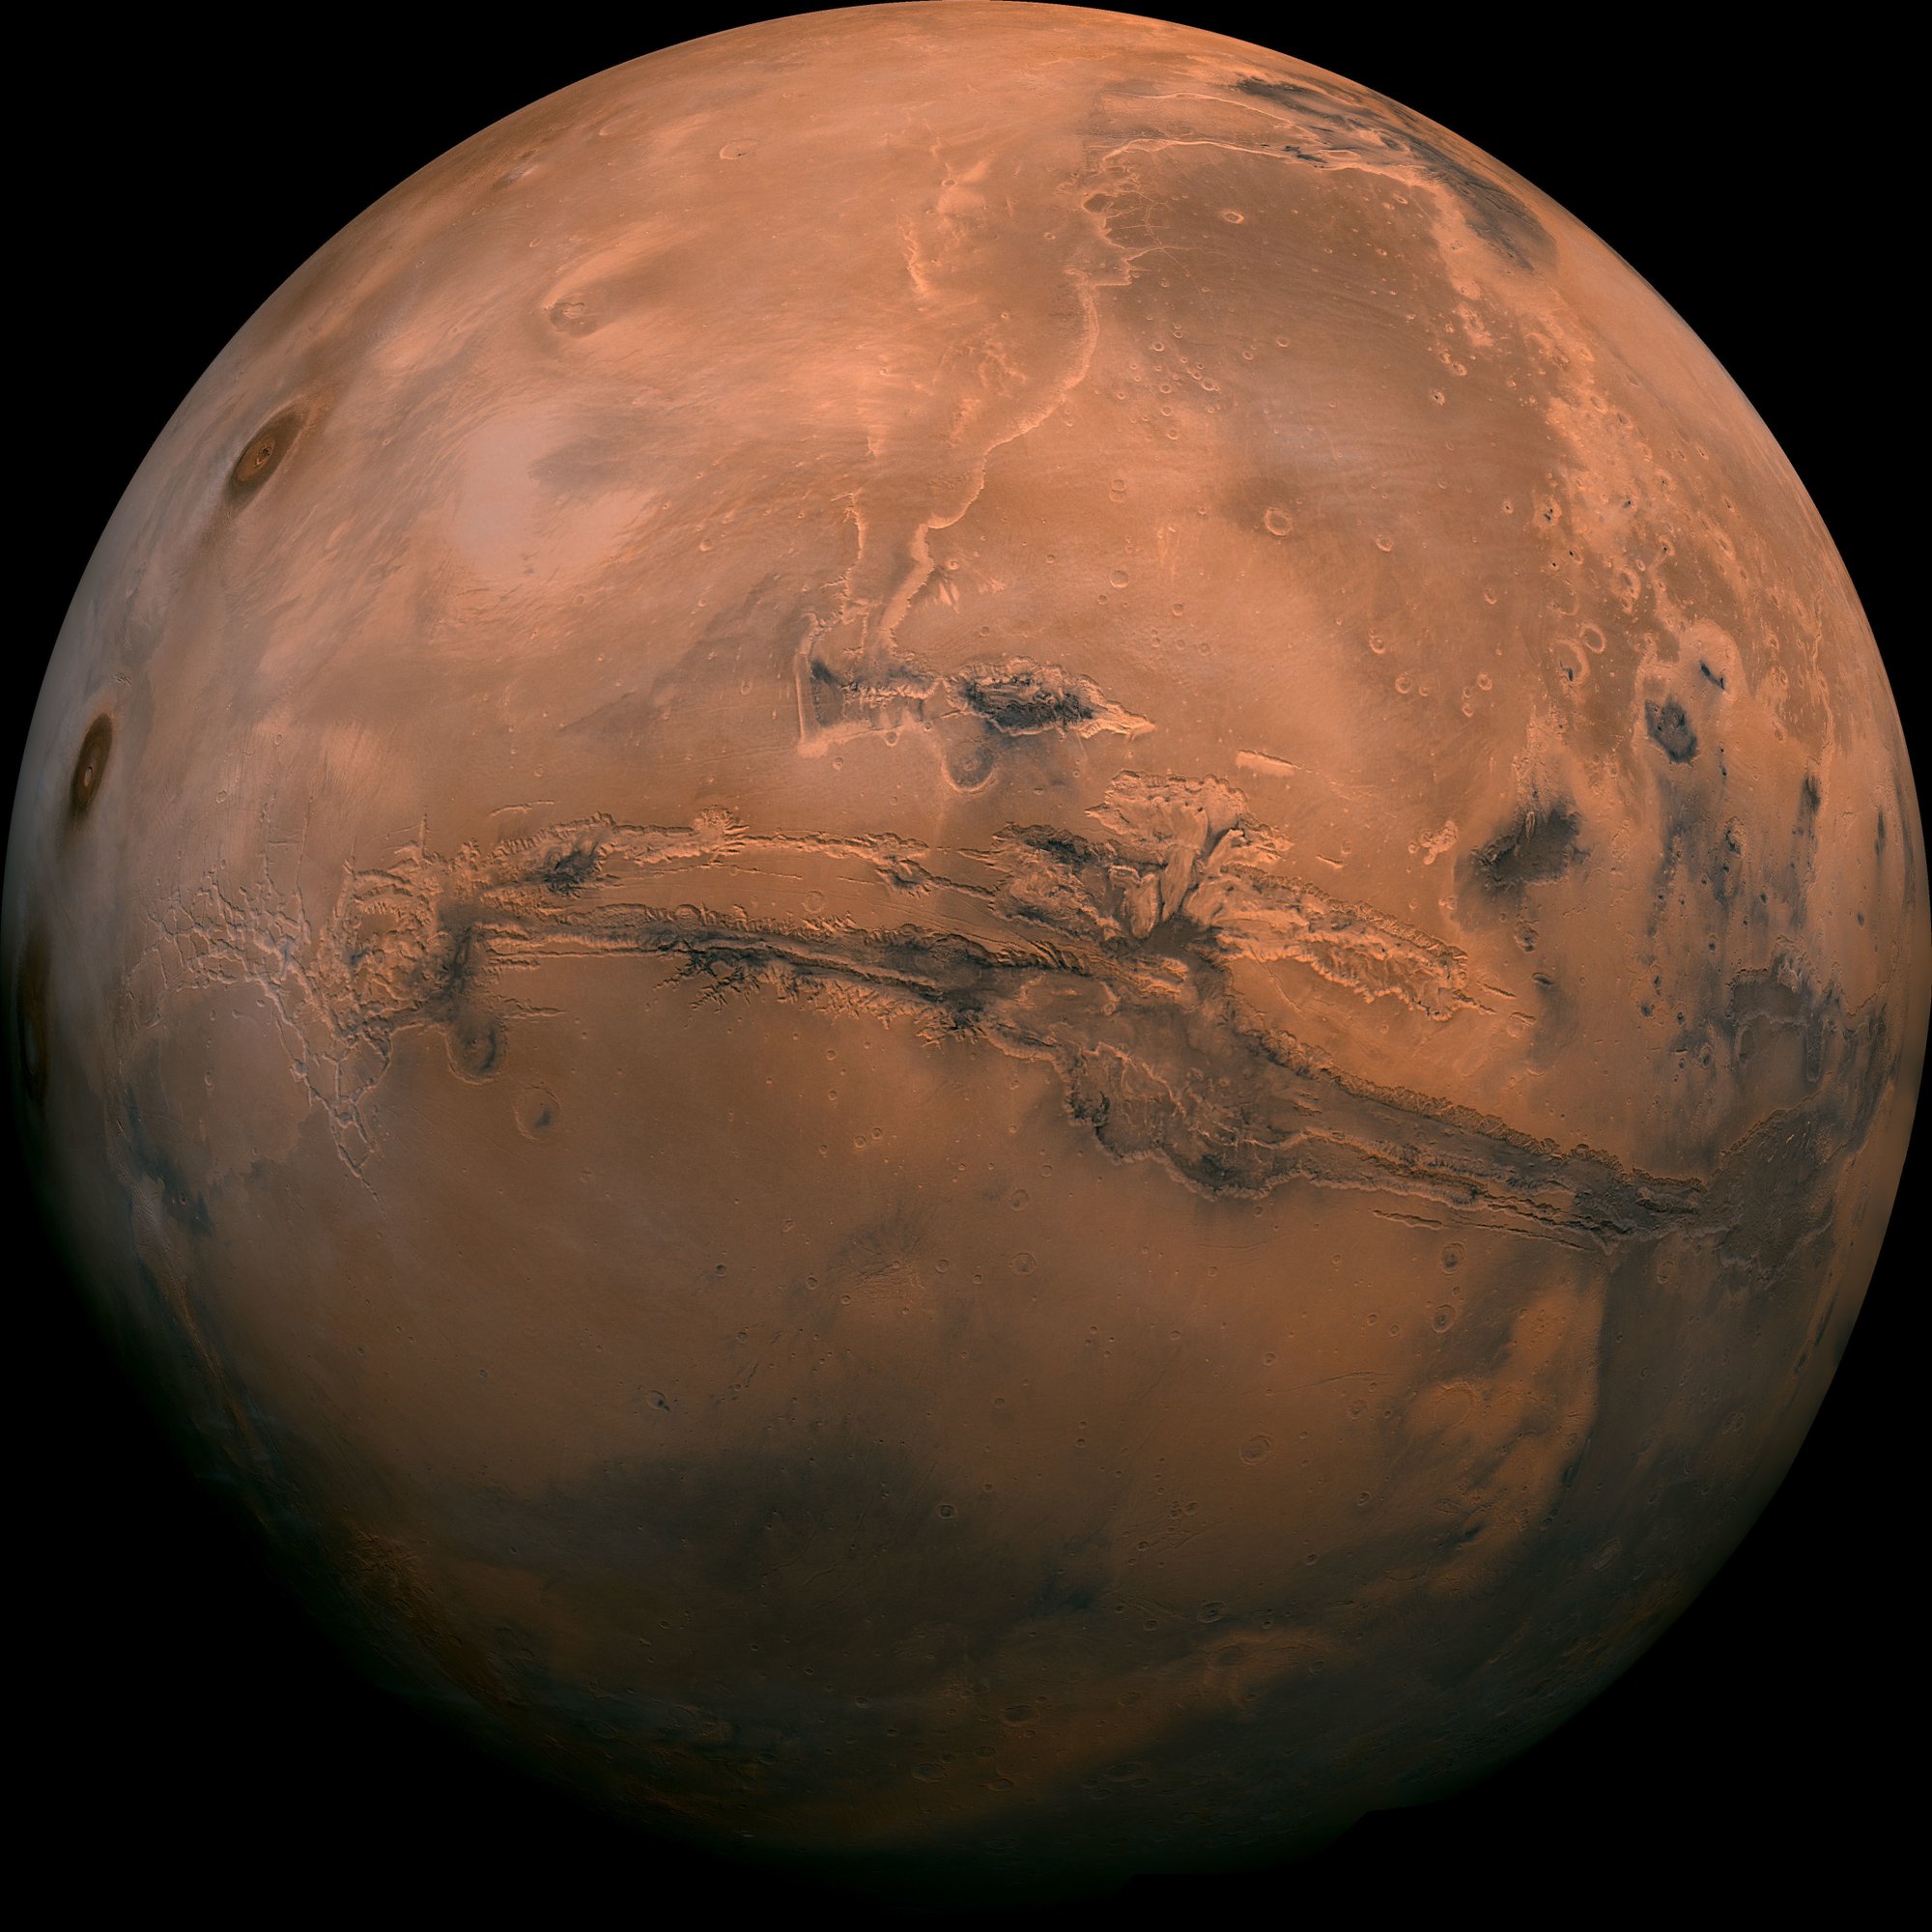 FILE - This image made available by NASA shows the planet Mars. Photo: AP